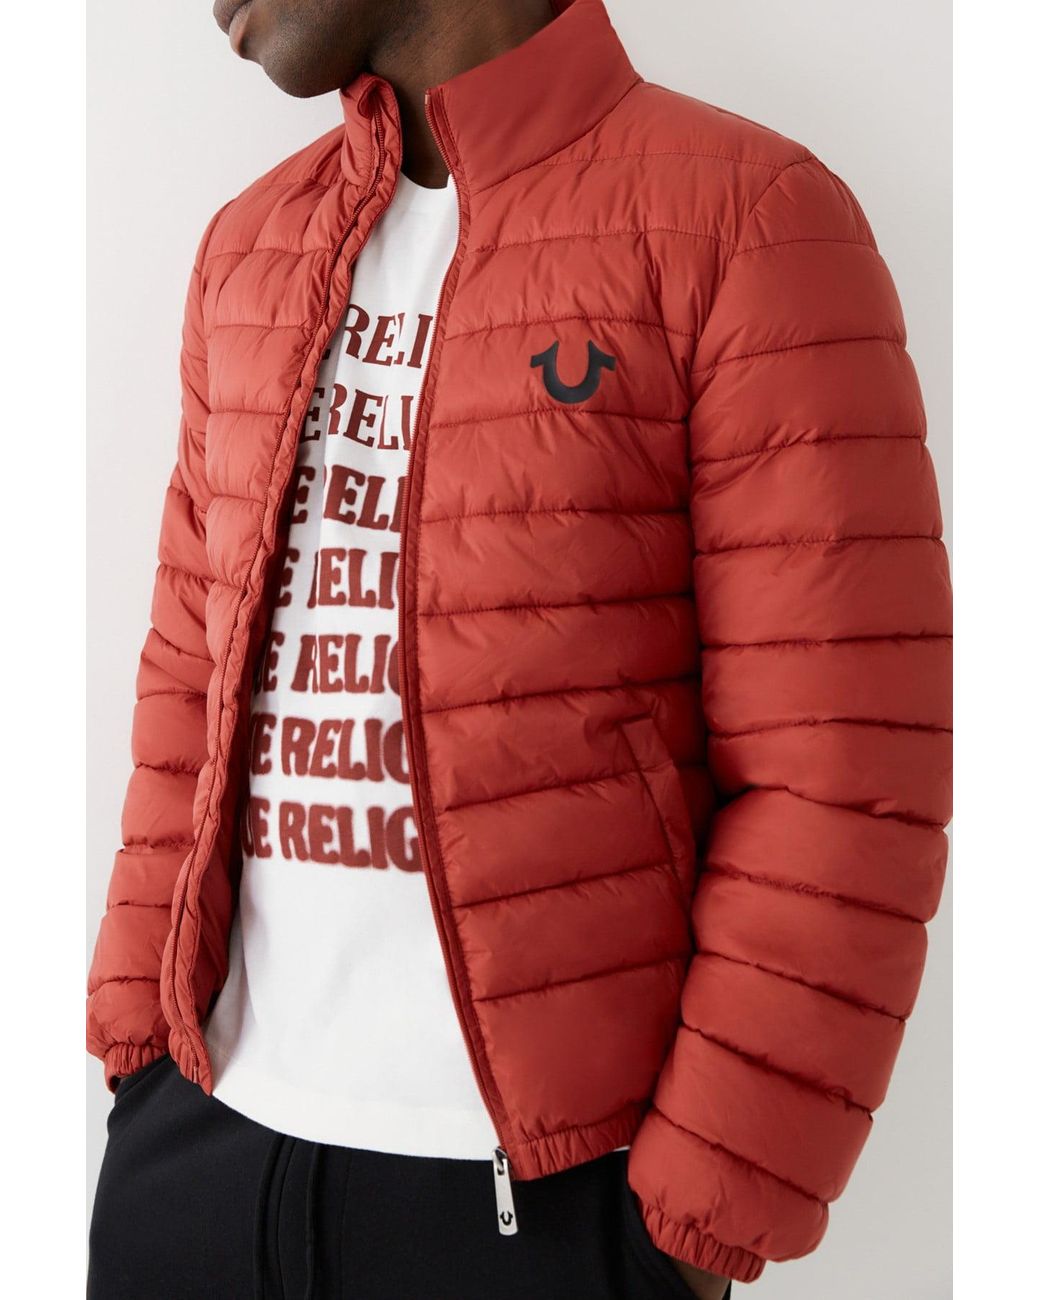 True Religion Synthetic Slim Zip Front Puffer Jacket in Red for Men - Lyst